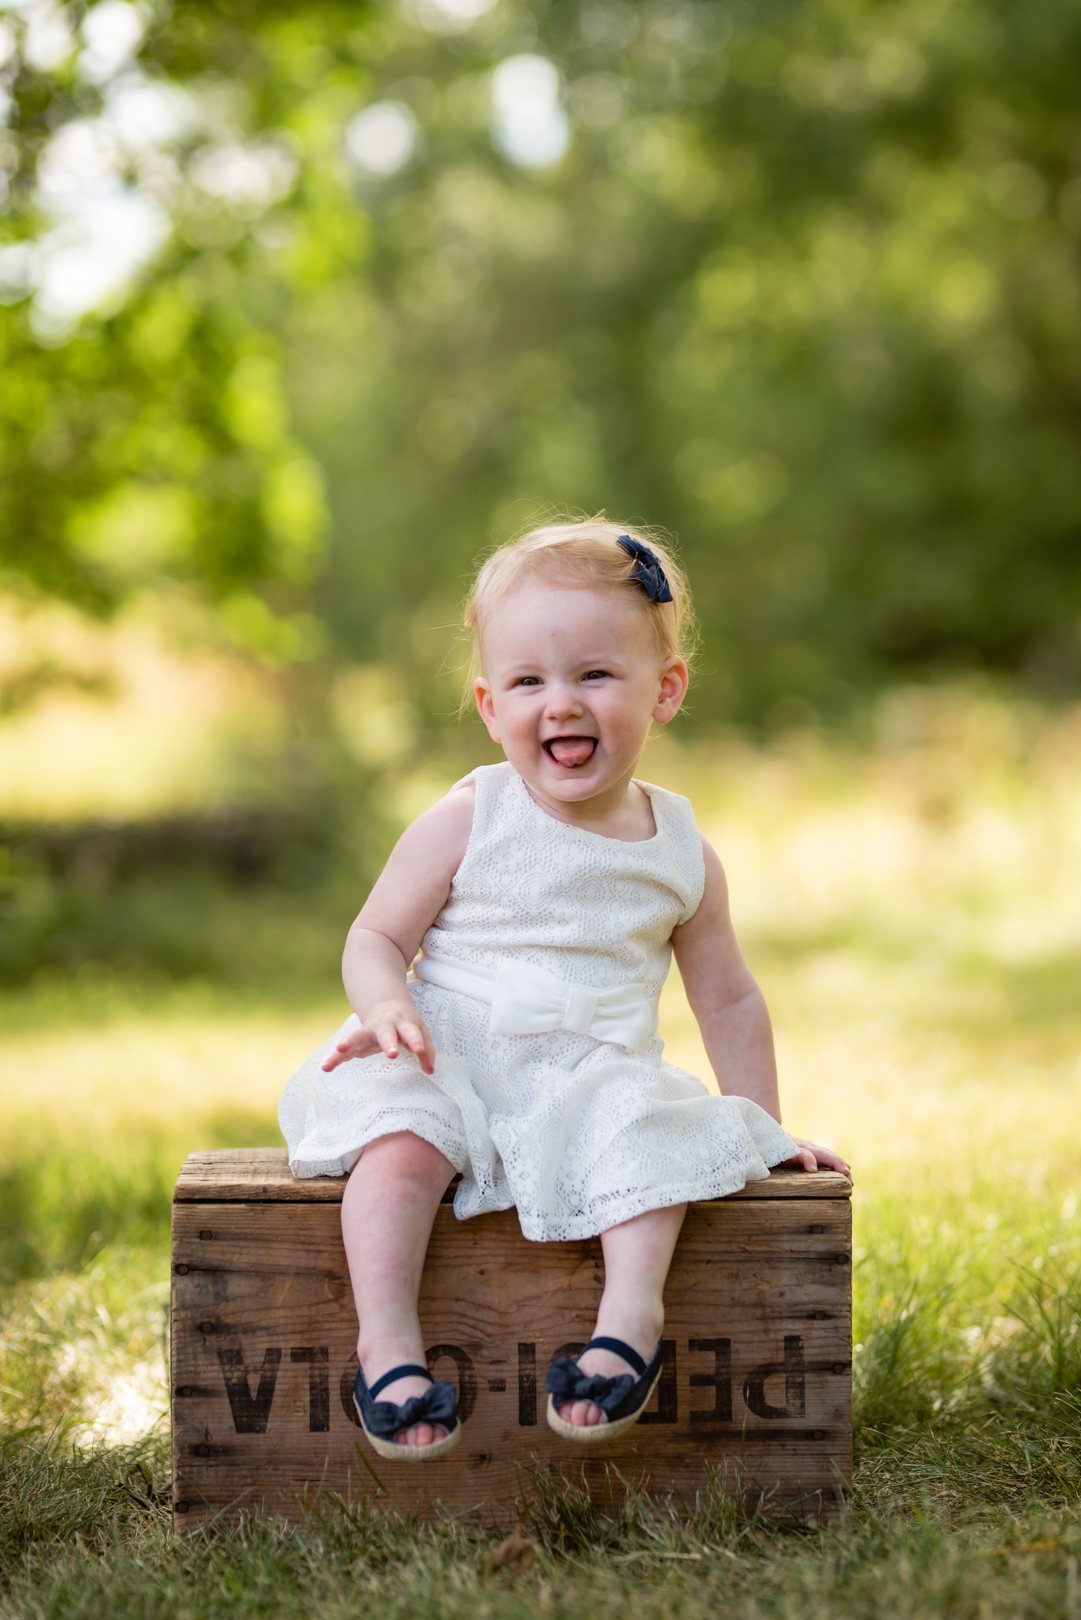 17Peterborough Photography Family Photography Naomi Lucienne072019.jpg